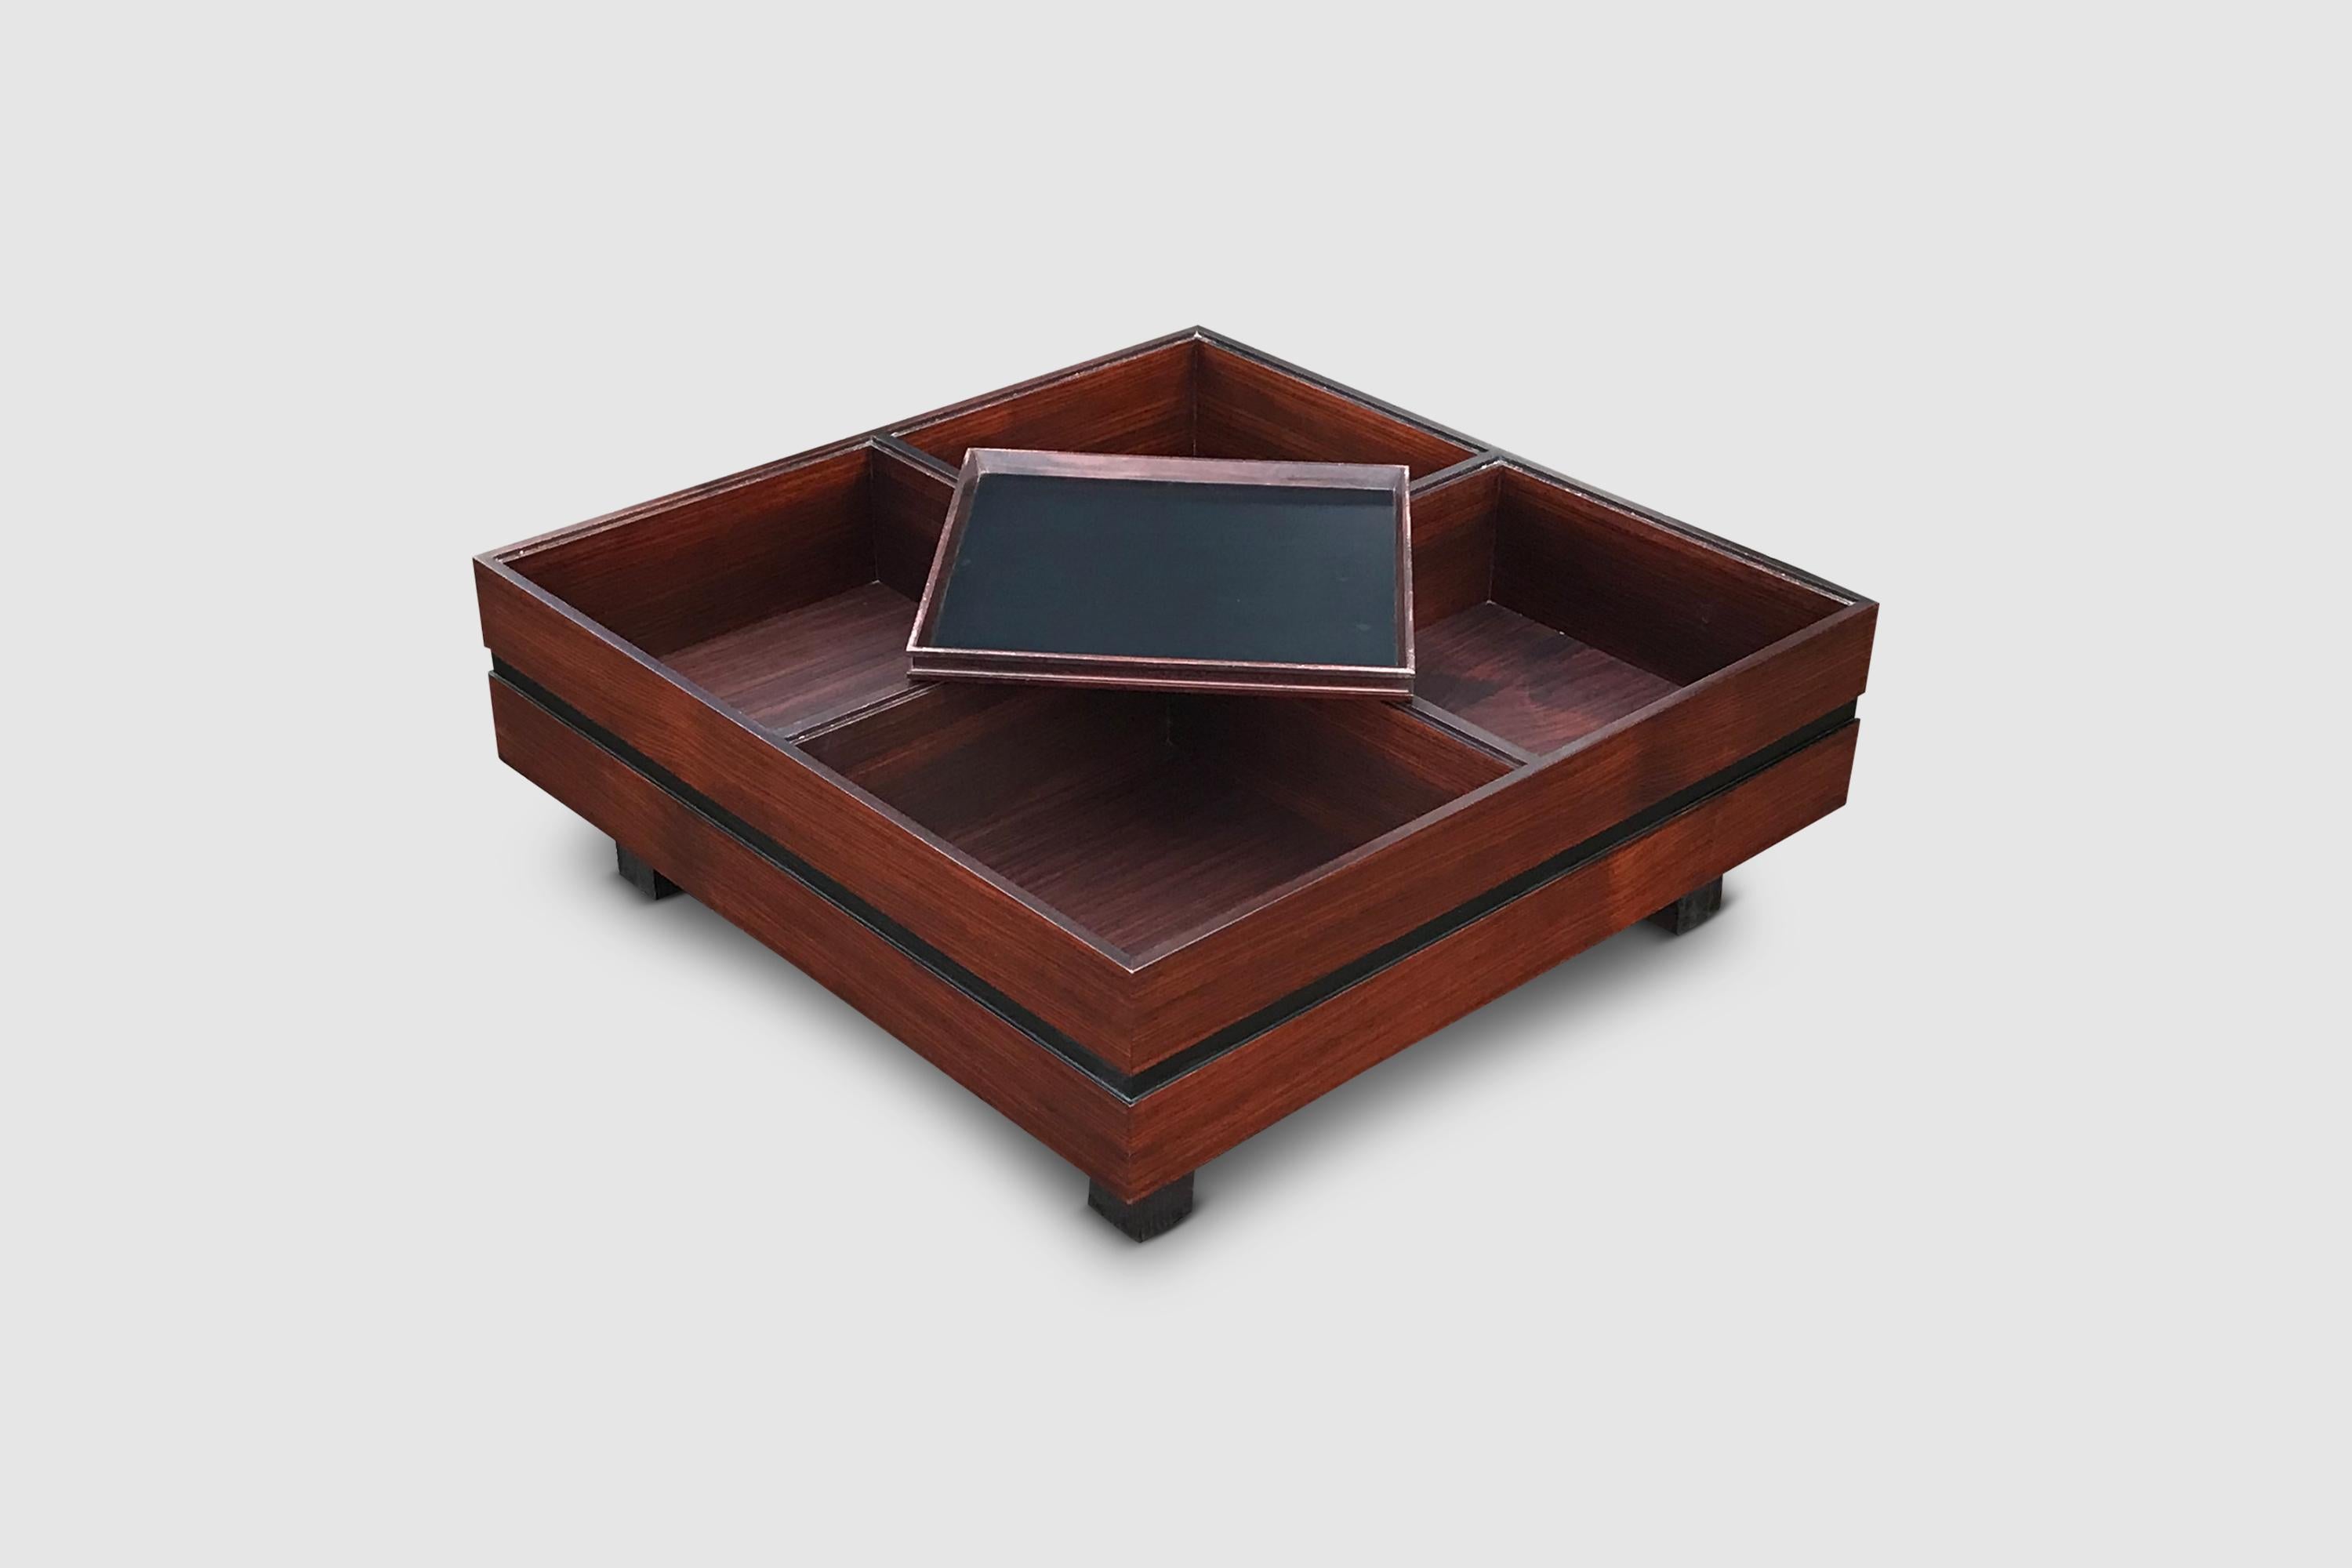 Italian Compartmented Teak Coffee Table by Carlo Hauner for Forma Italy 1960s For Sale